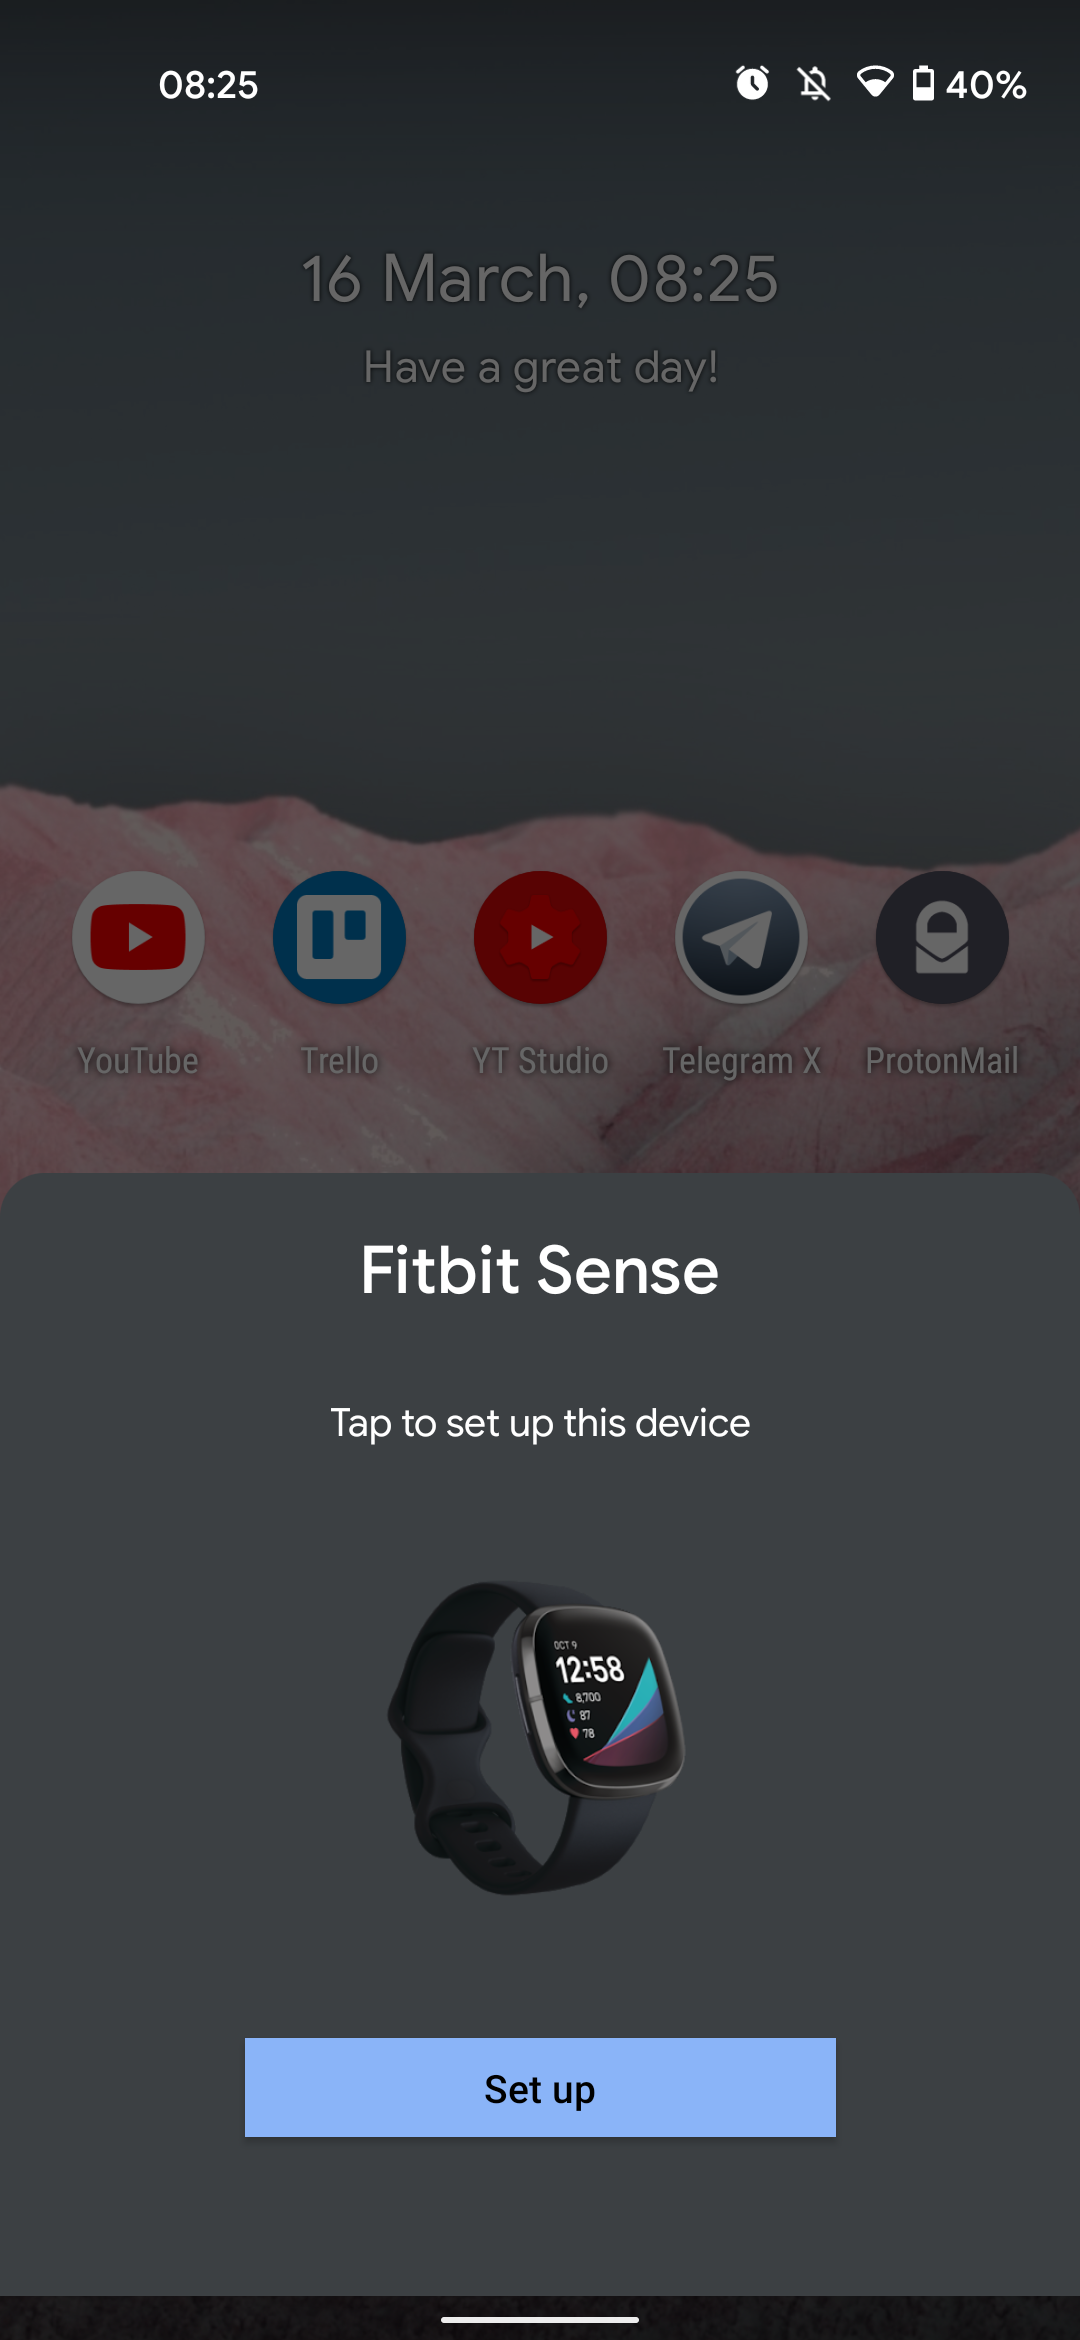 does fitbit connect to android